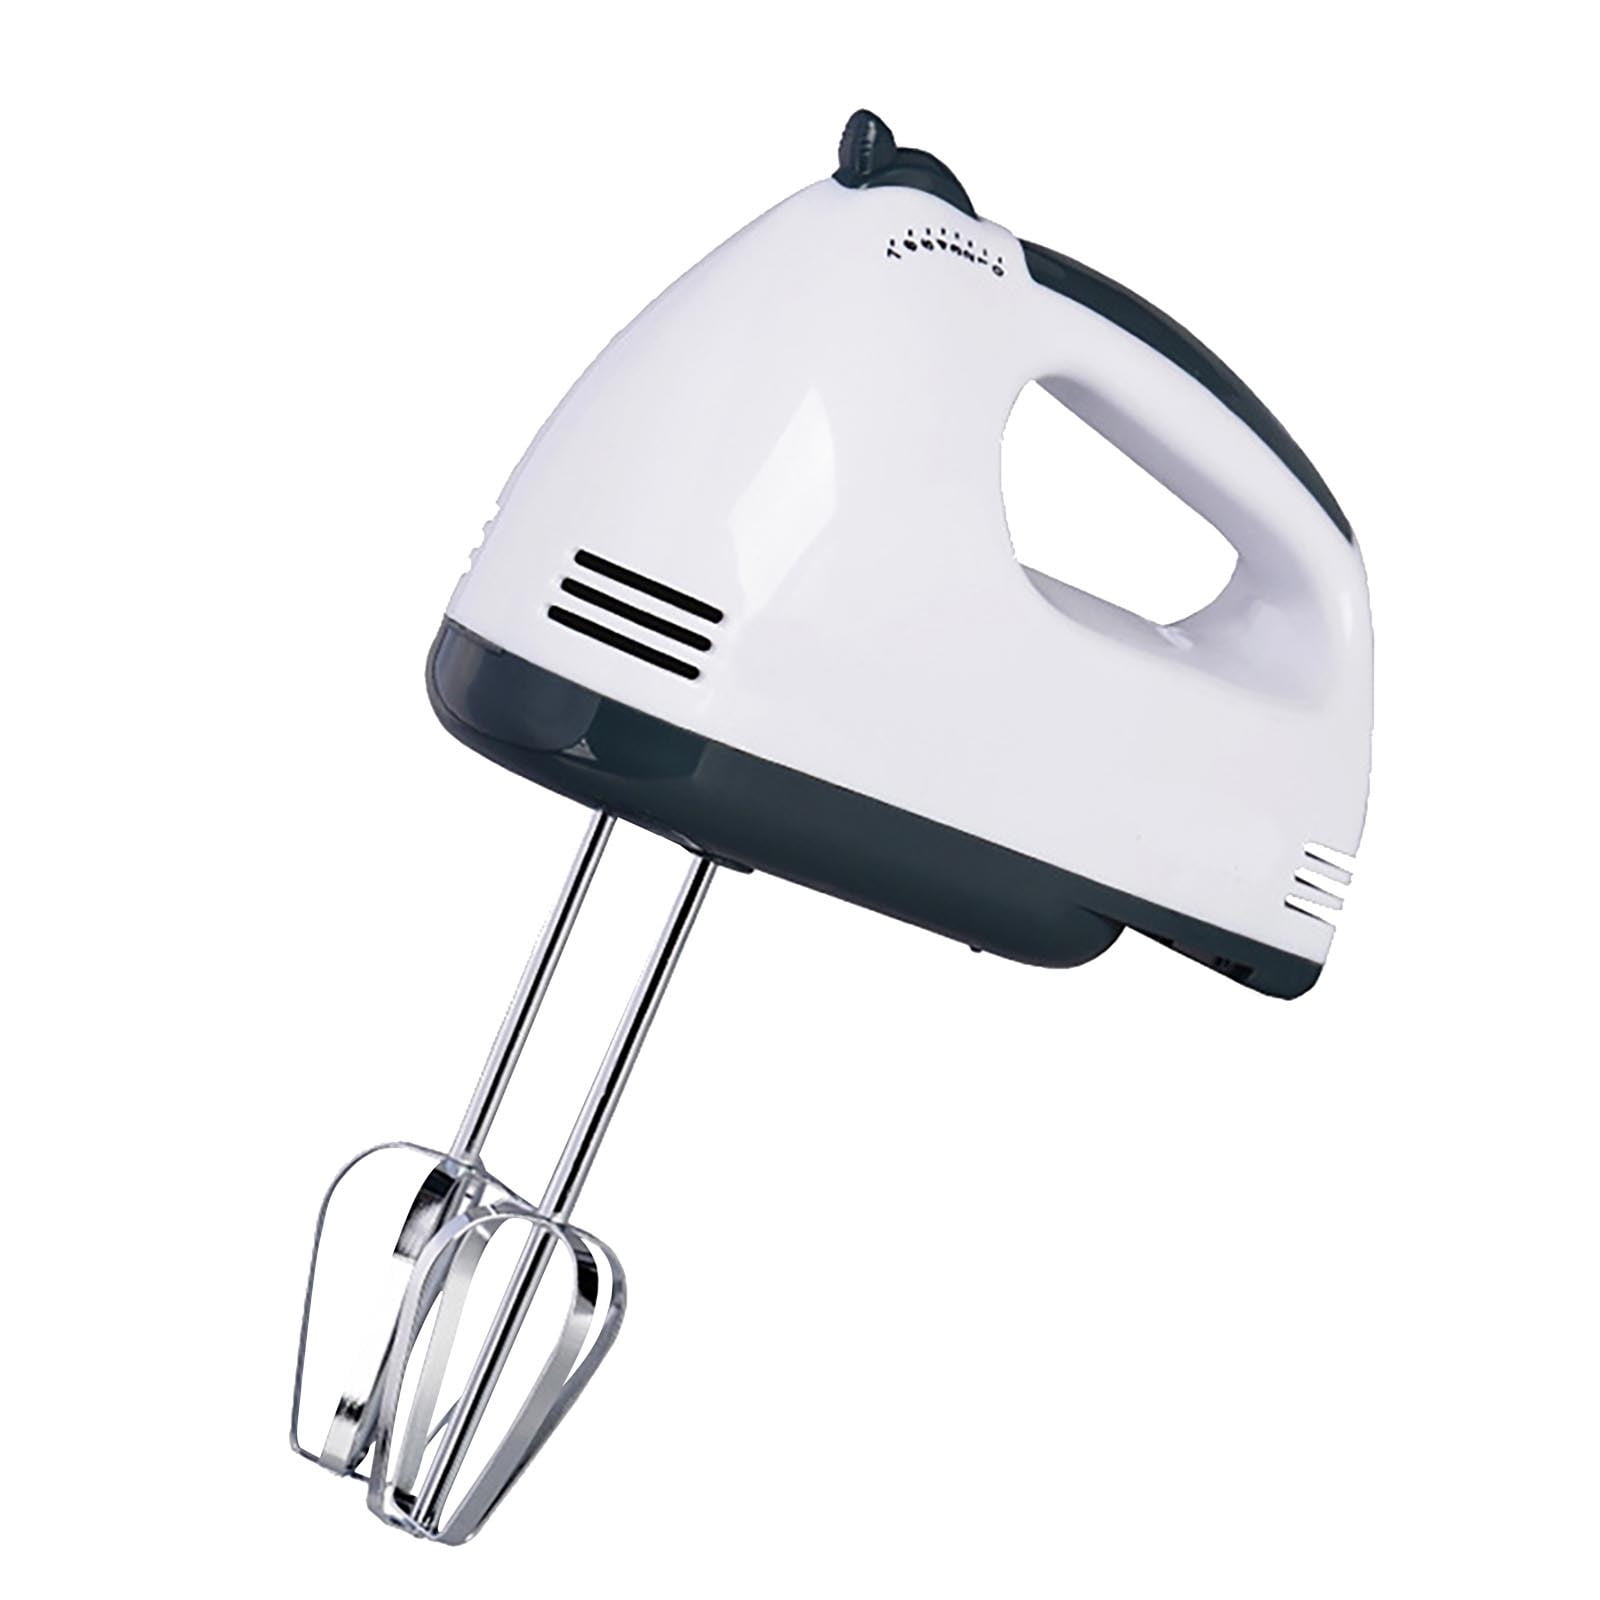 Kitchen aid stand hand electric small mini cordless cake food baking mixer  whisker, whisk mint green kitchen accessories handheld household mixers egg  beater stirrer 